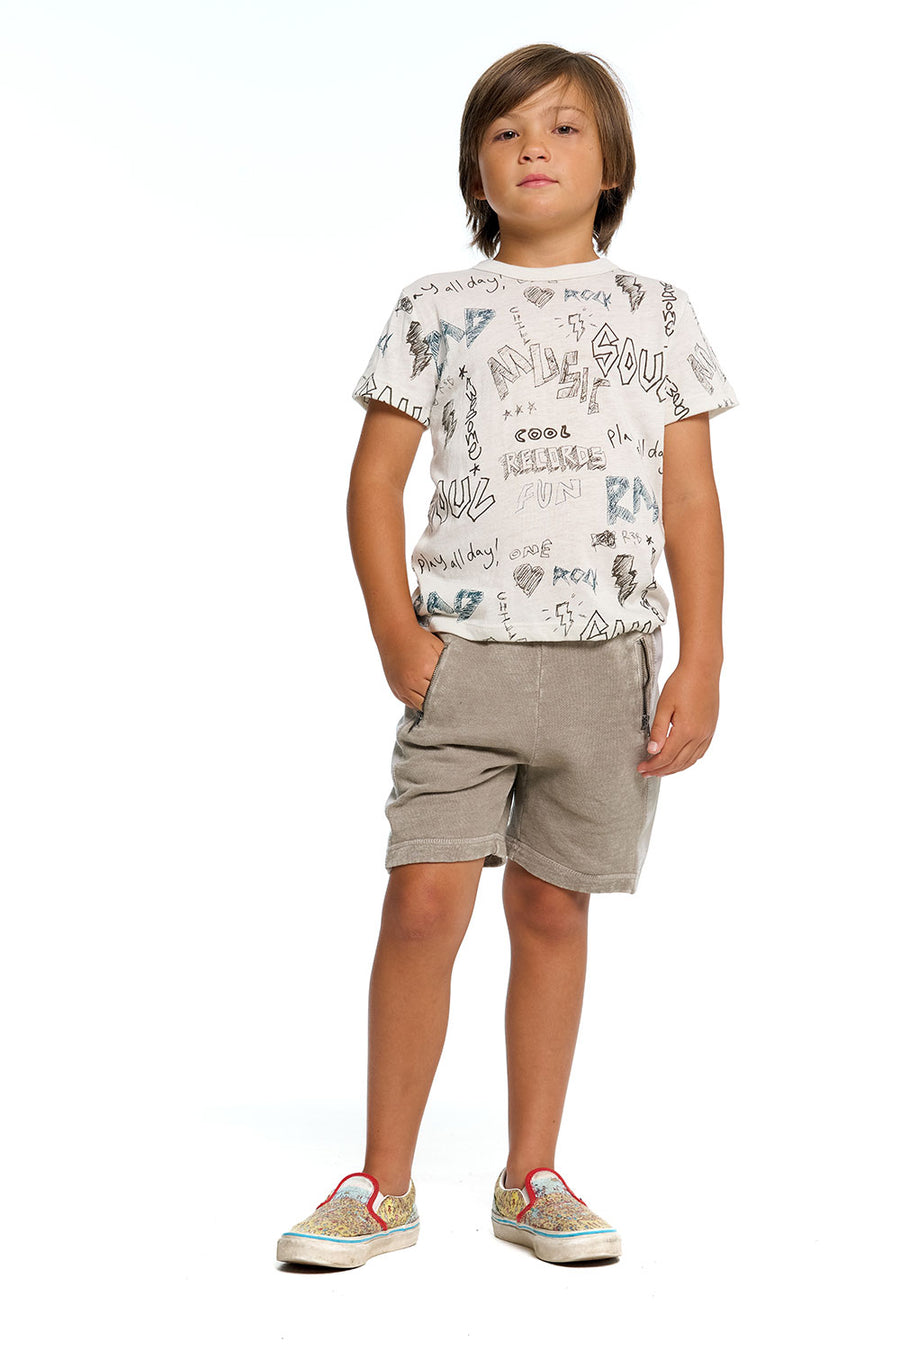 Boys Linen French Terry With Heirloom Wovens And Rib Zipper BOYS chaserbrand